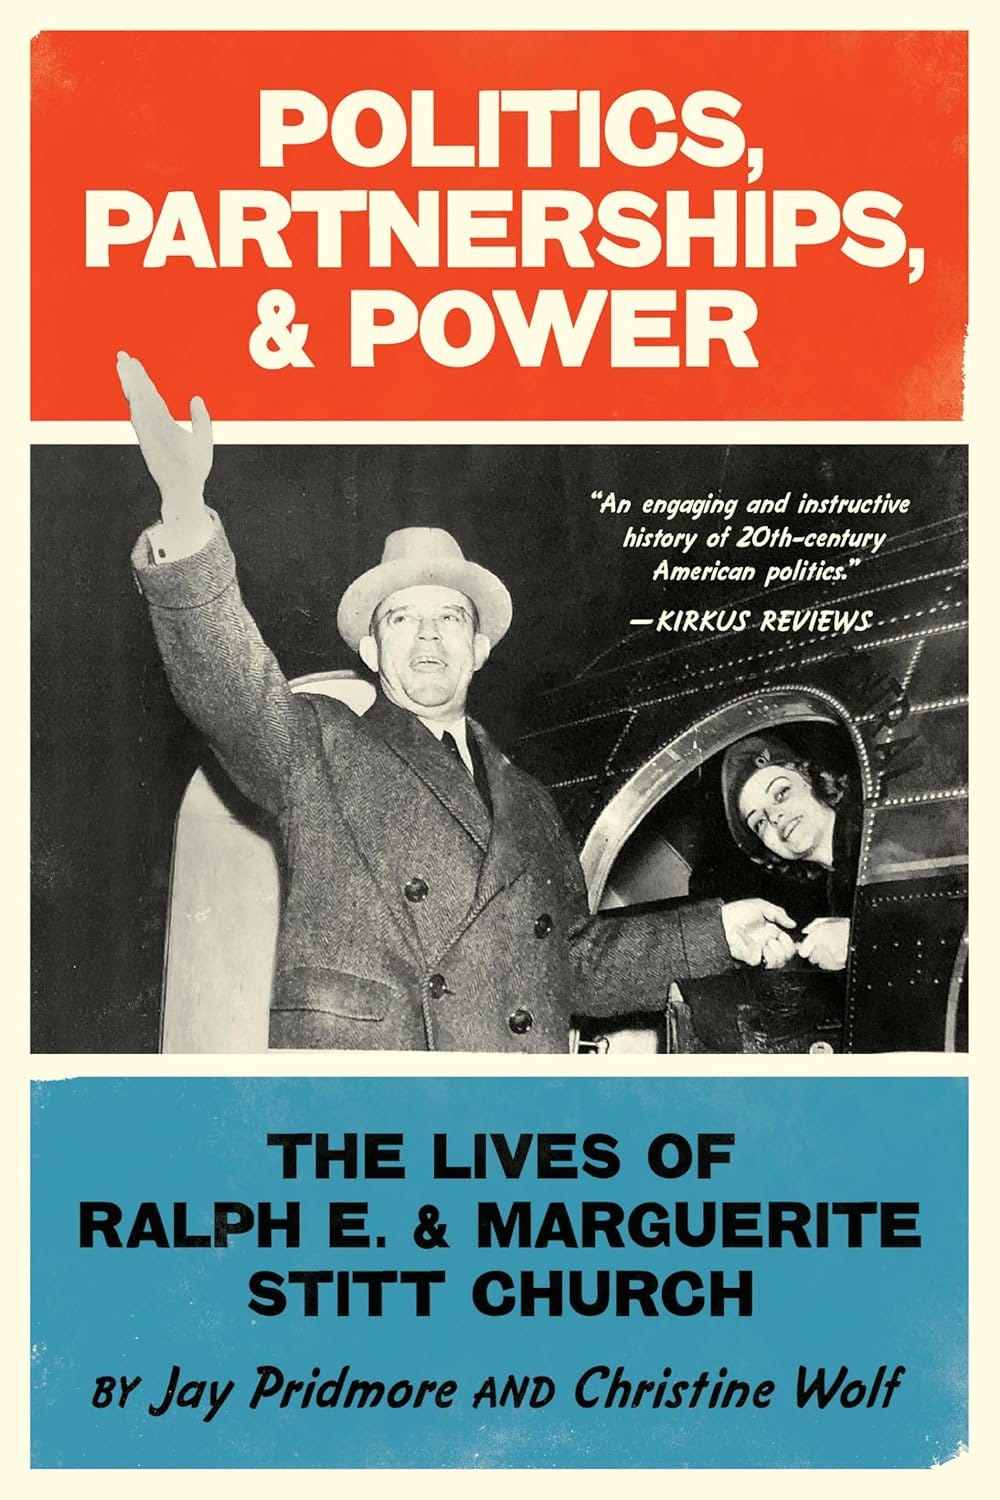 Cover image of Politics, Partnerships, & Power: The Lives of Ralph E. and Marguerite Stitt Church